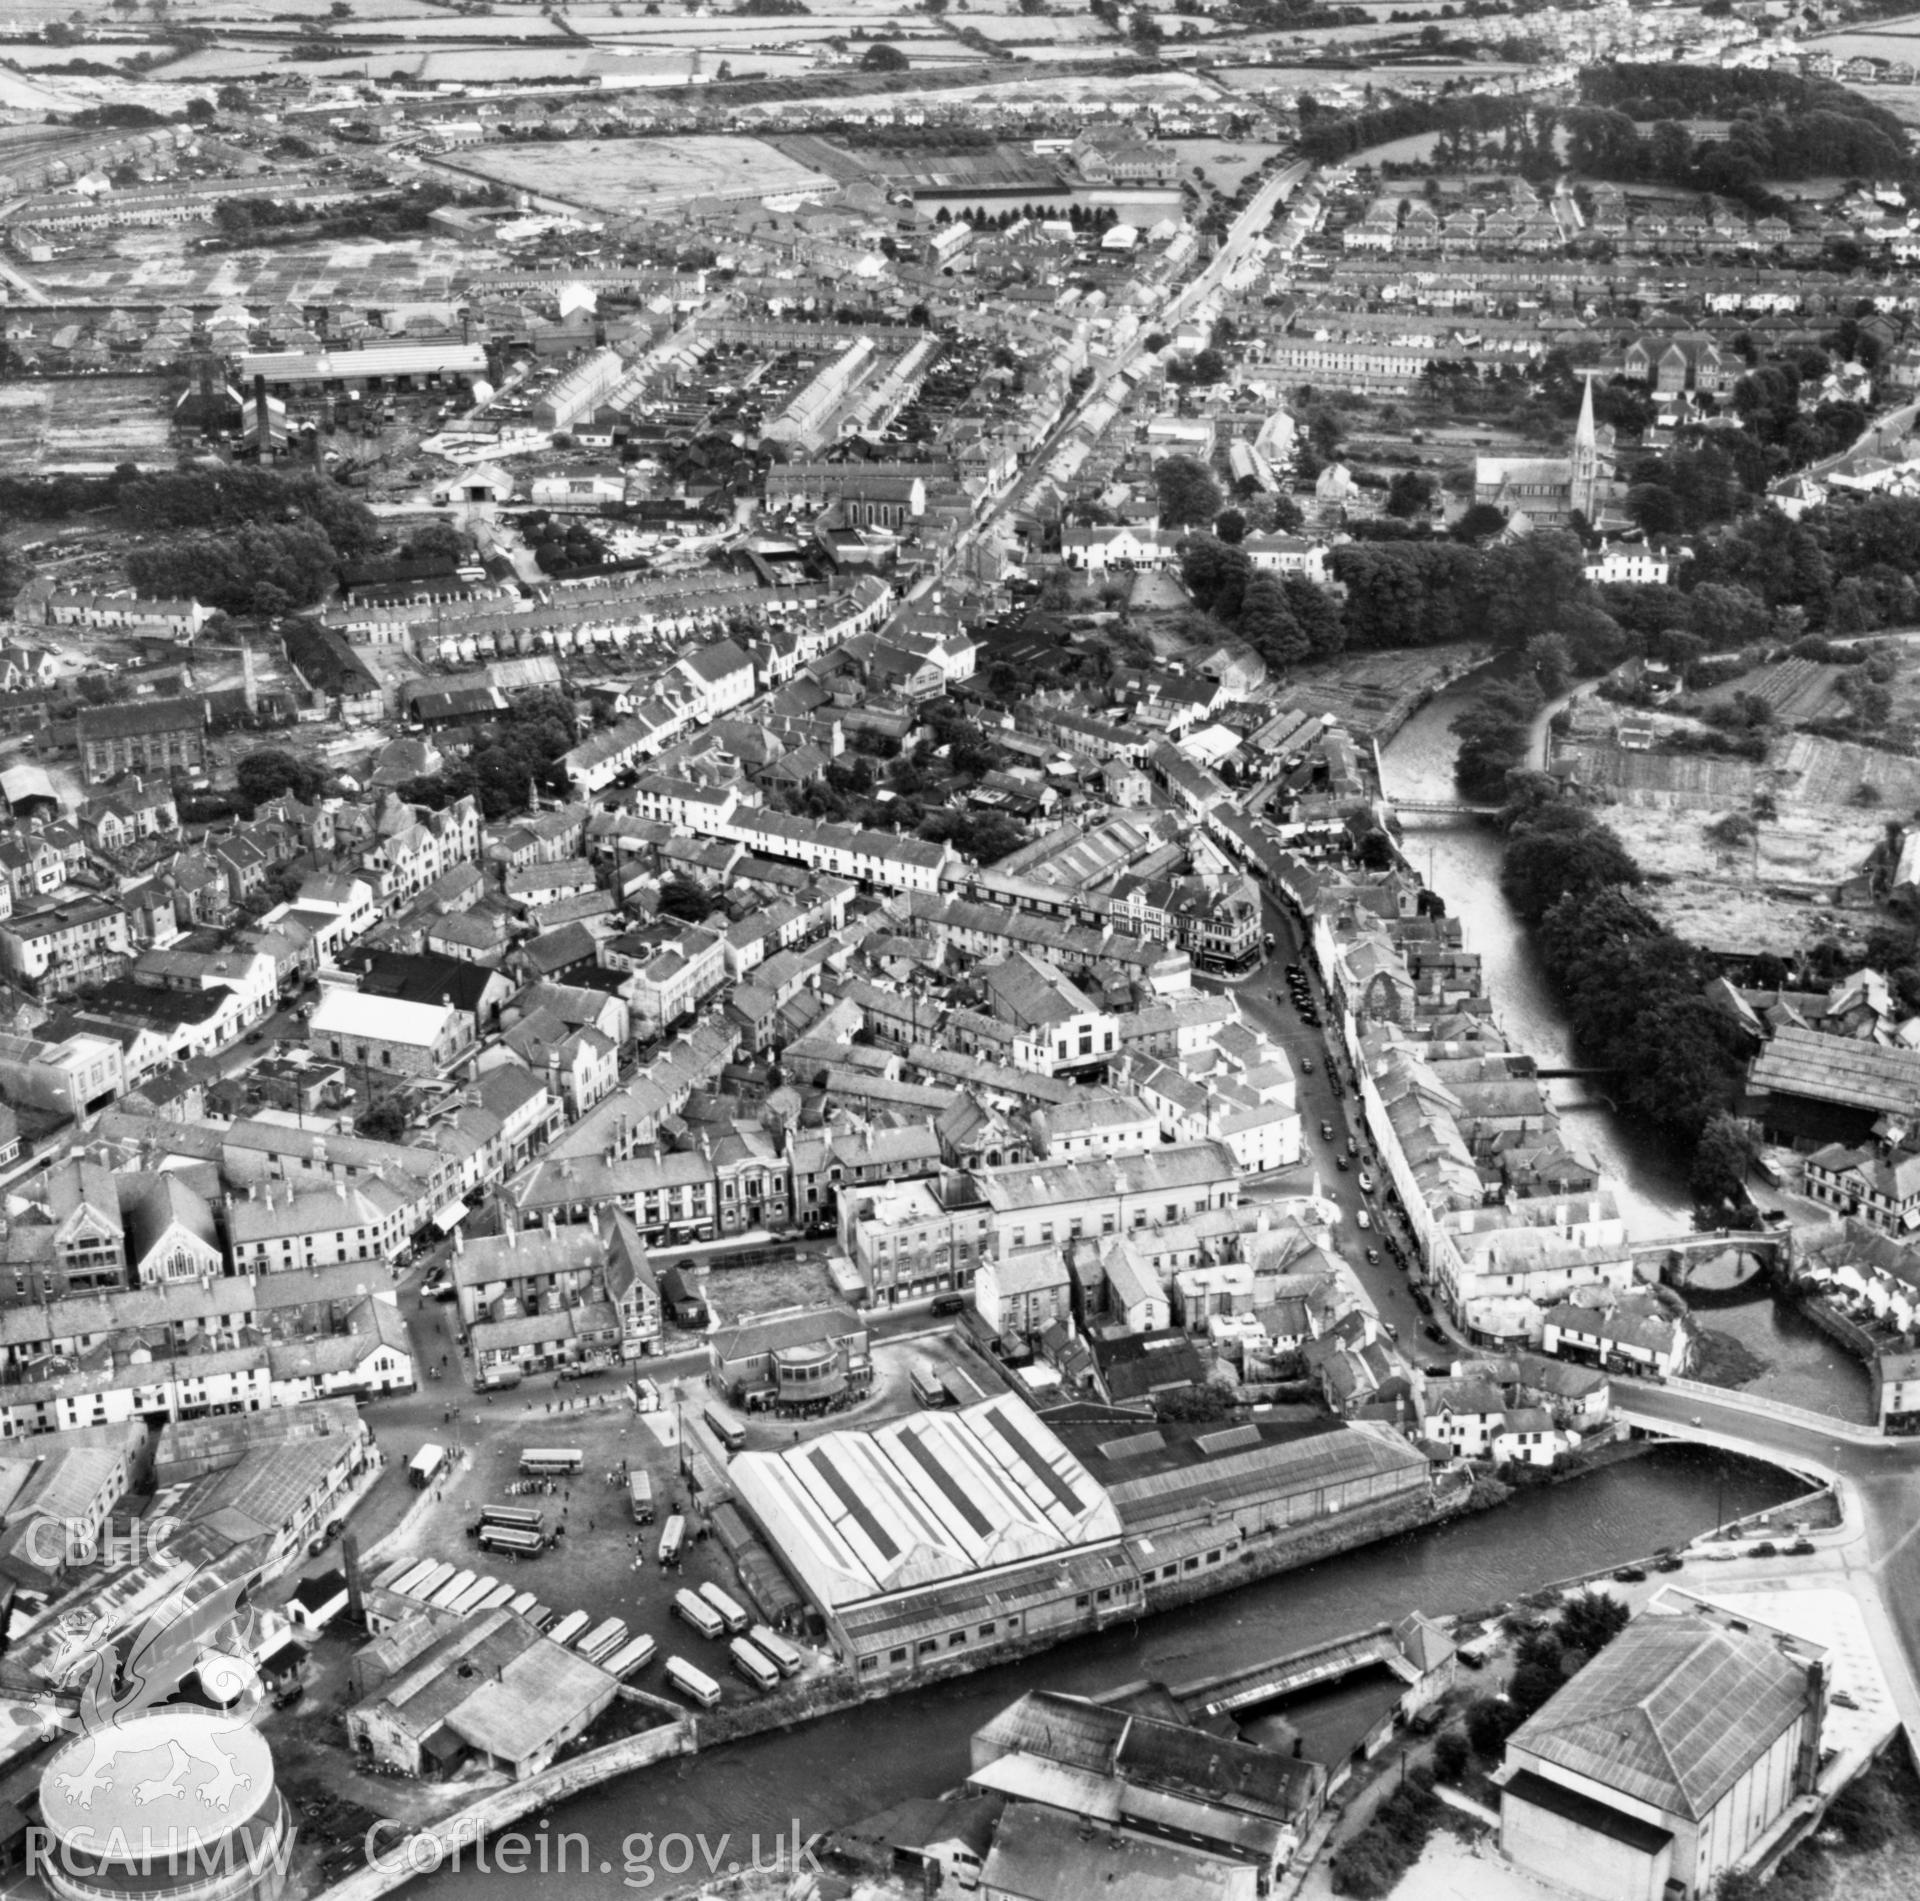 View of Bridgend showing river and bus station (reversed). Oblique aerial photograph, 5?" cut roll film.